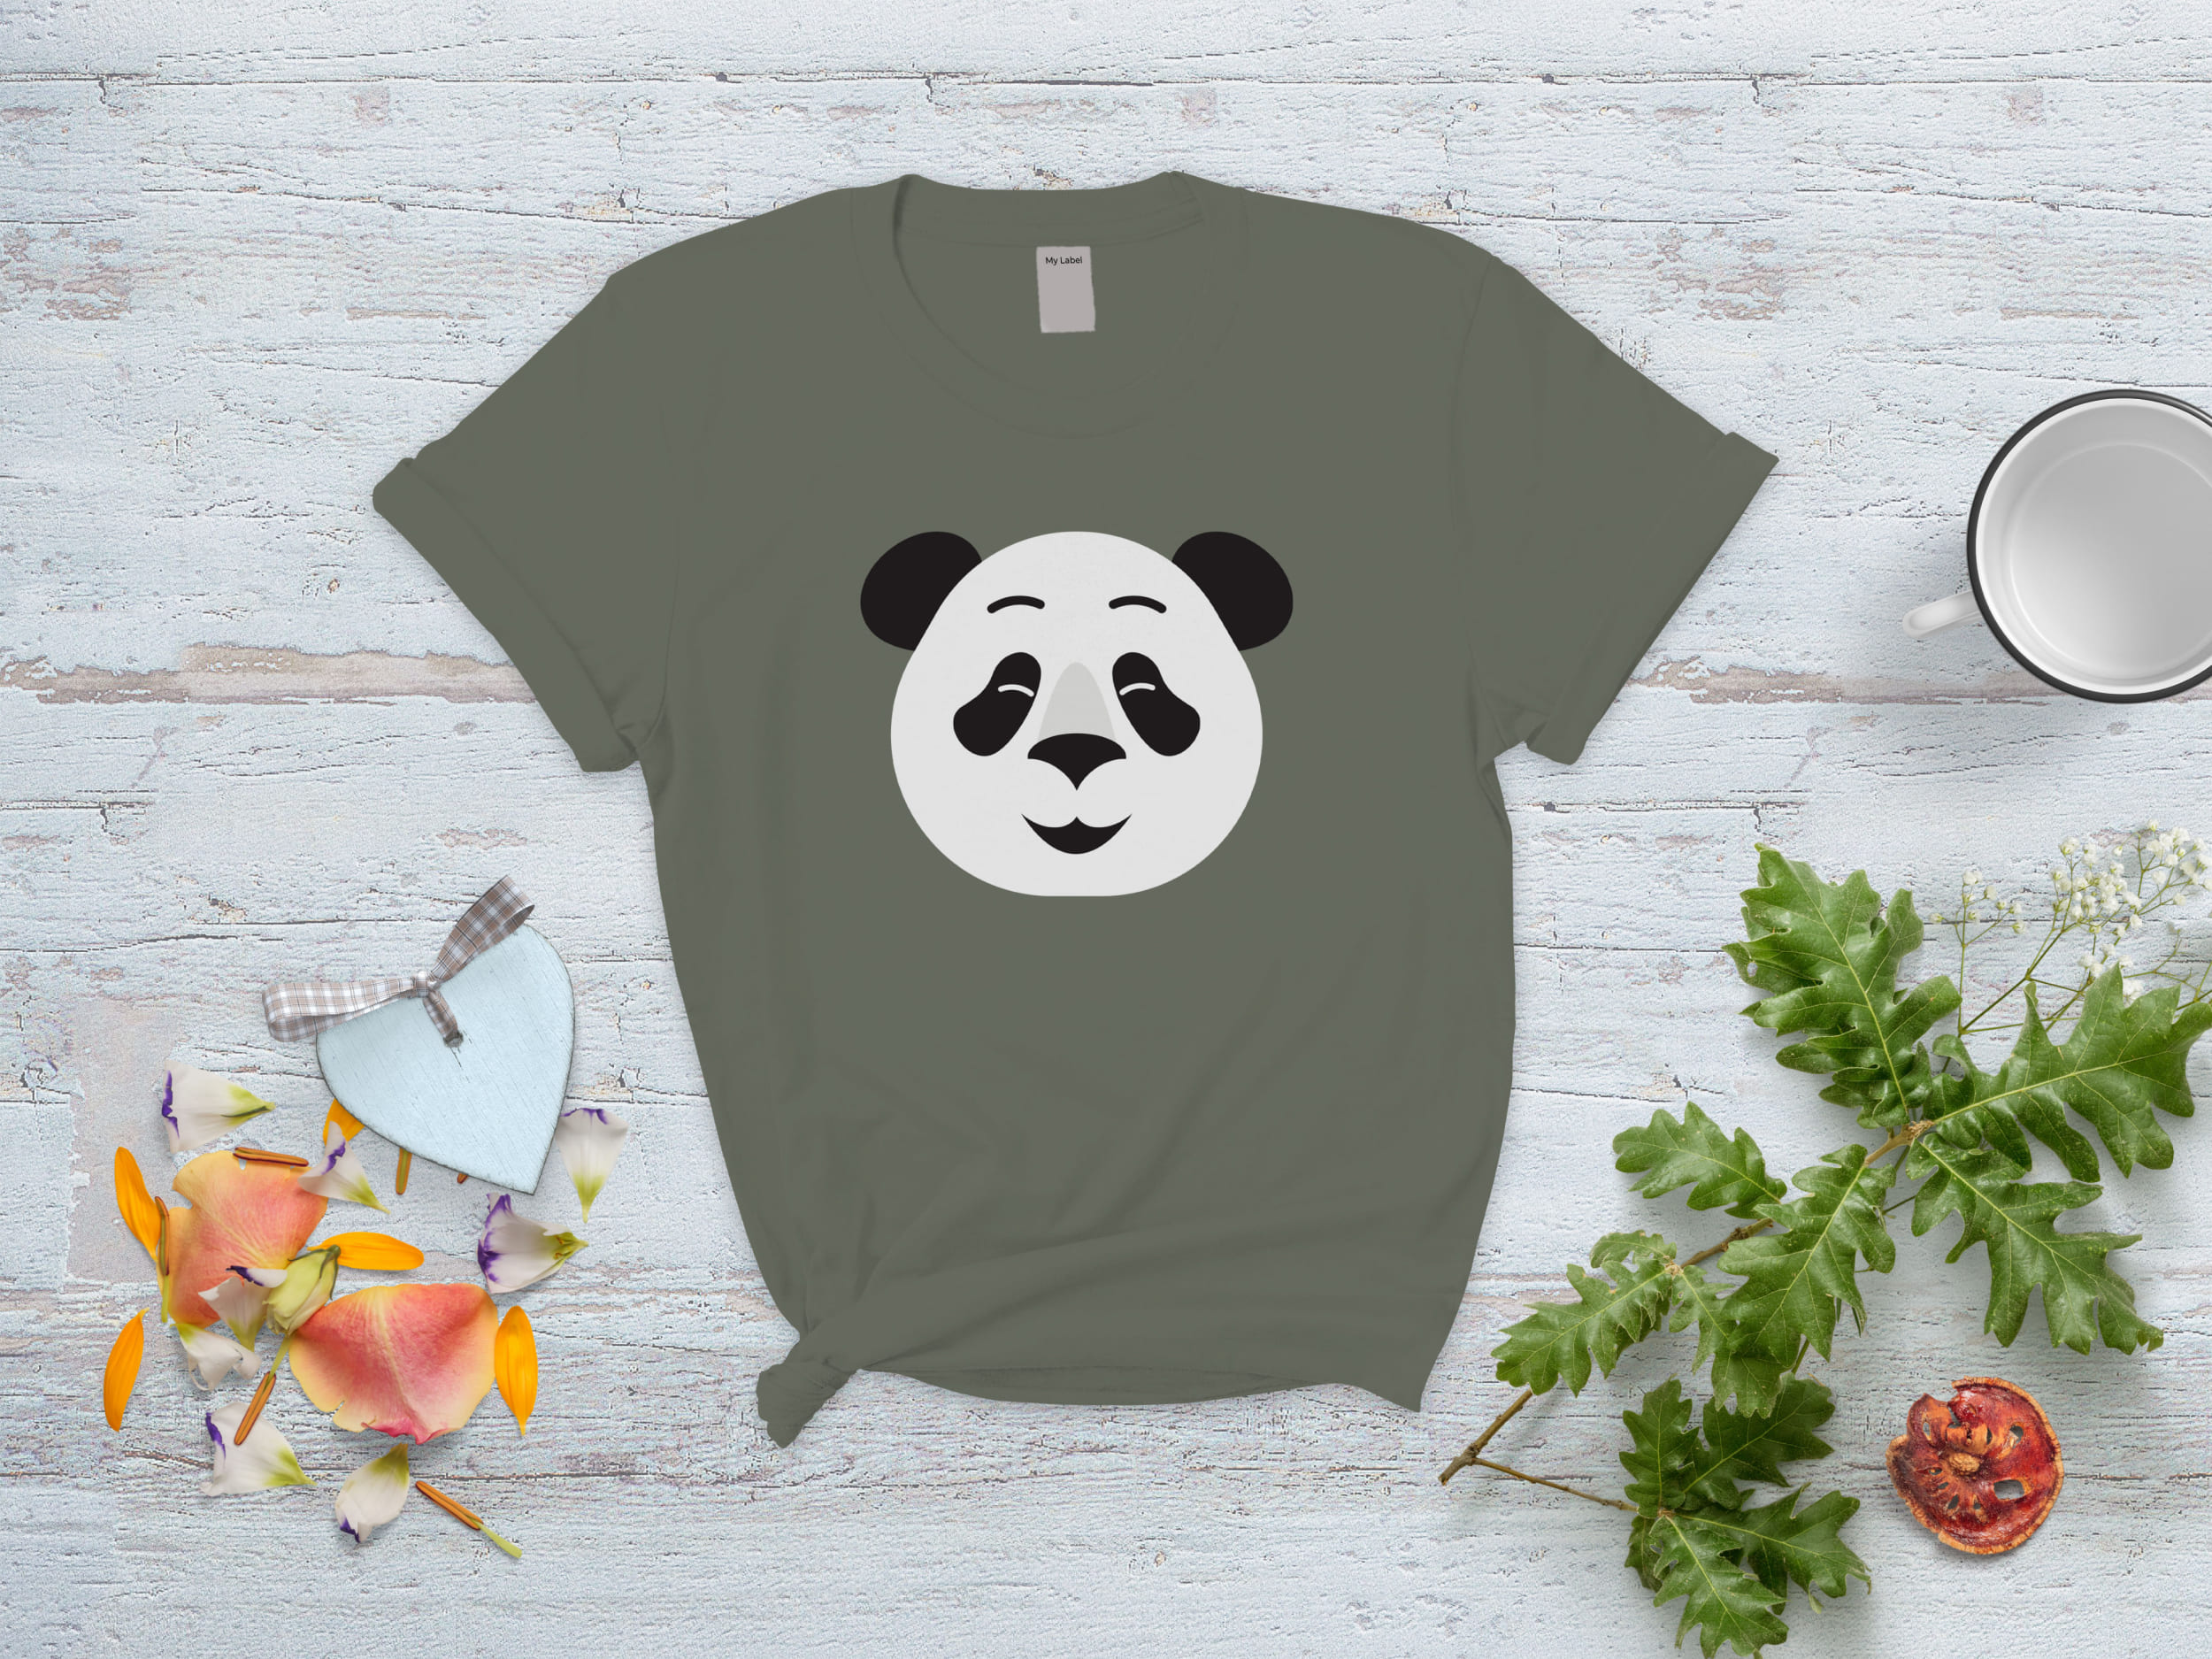 Gray t-shirt with a panda cute face on a gray and white background with various objects.